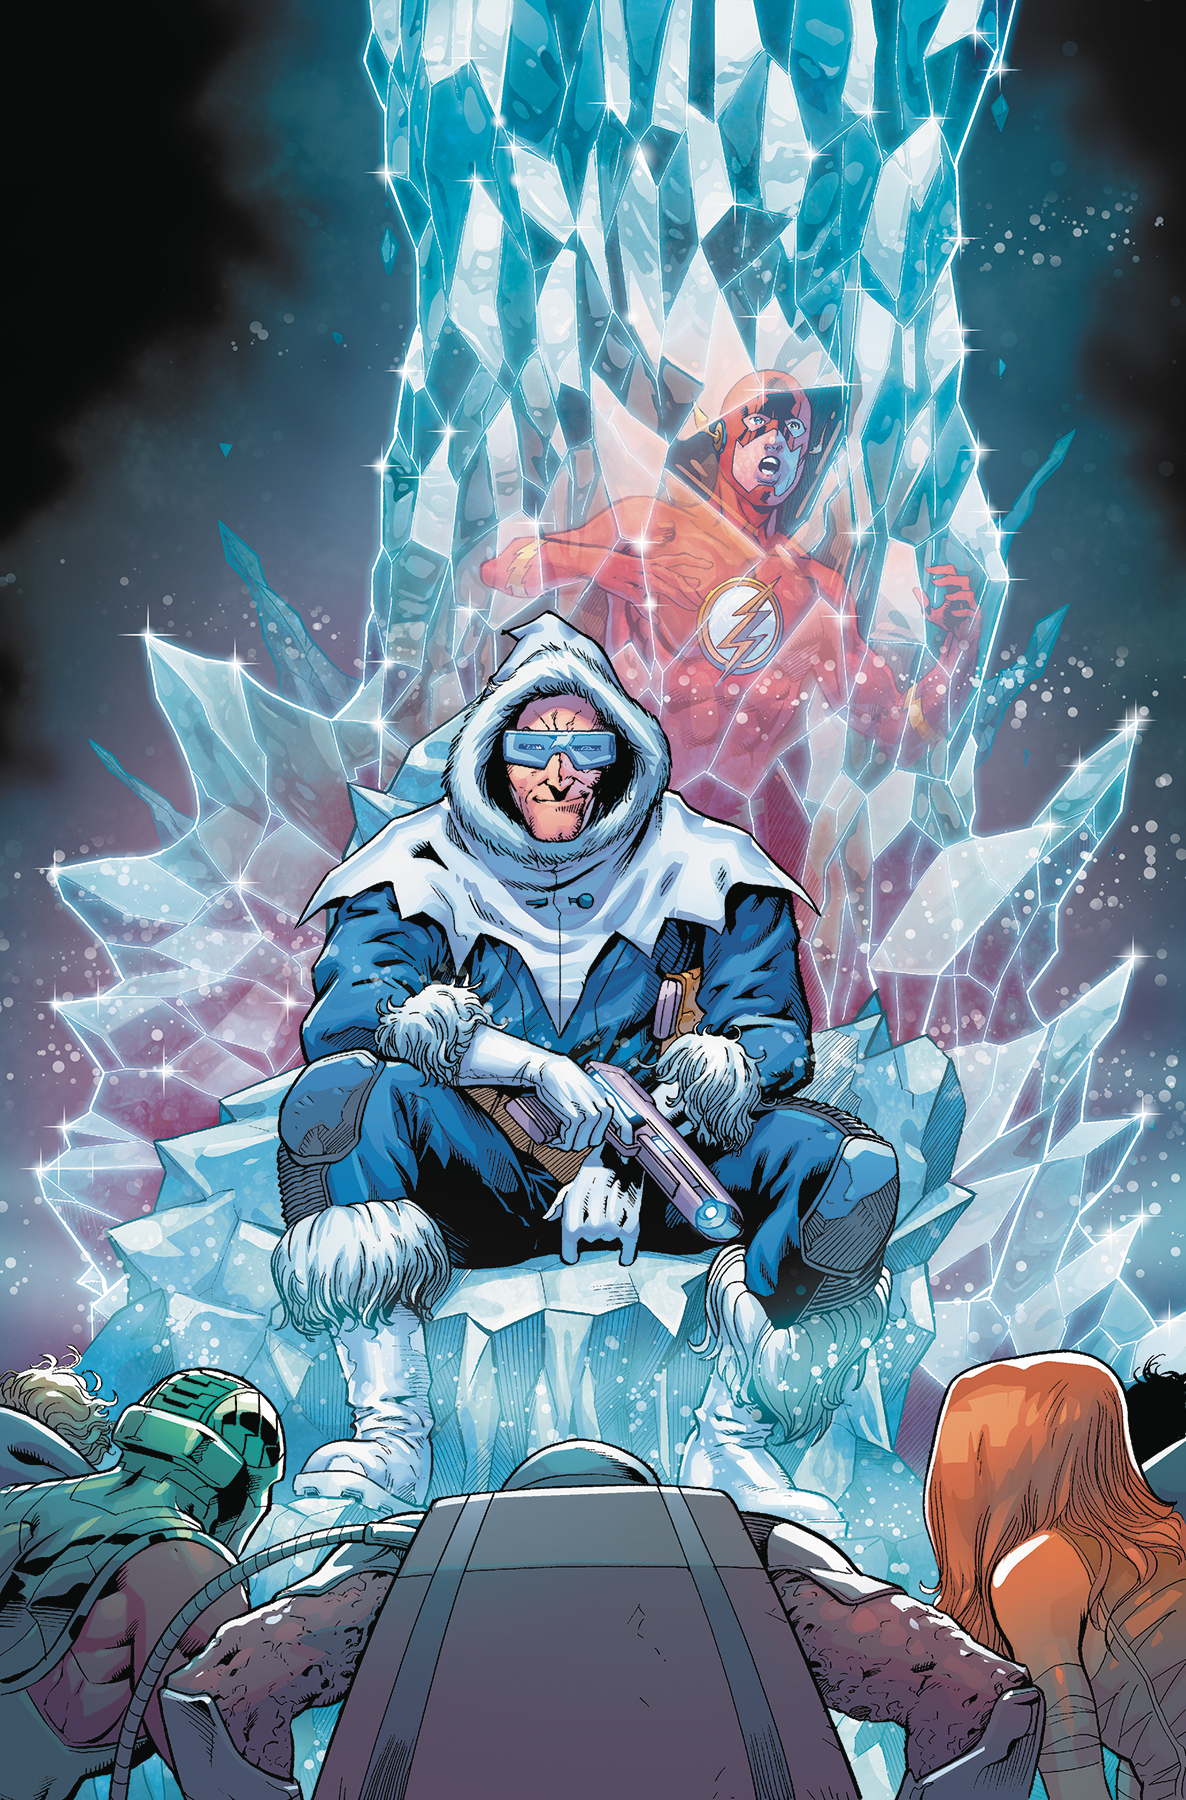 Who is Captain Cold's wife?